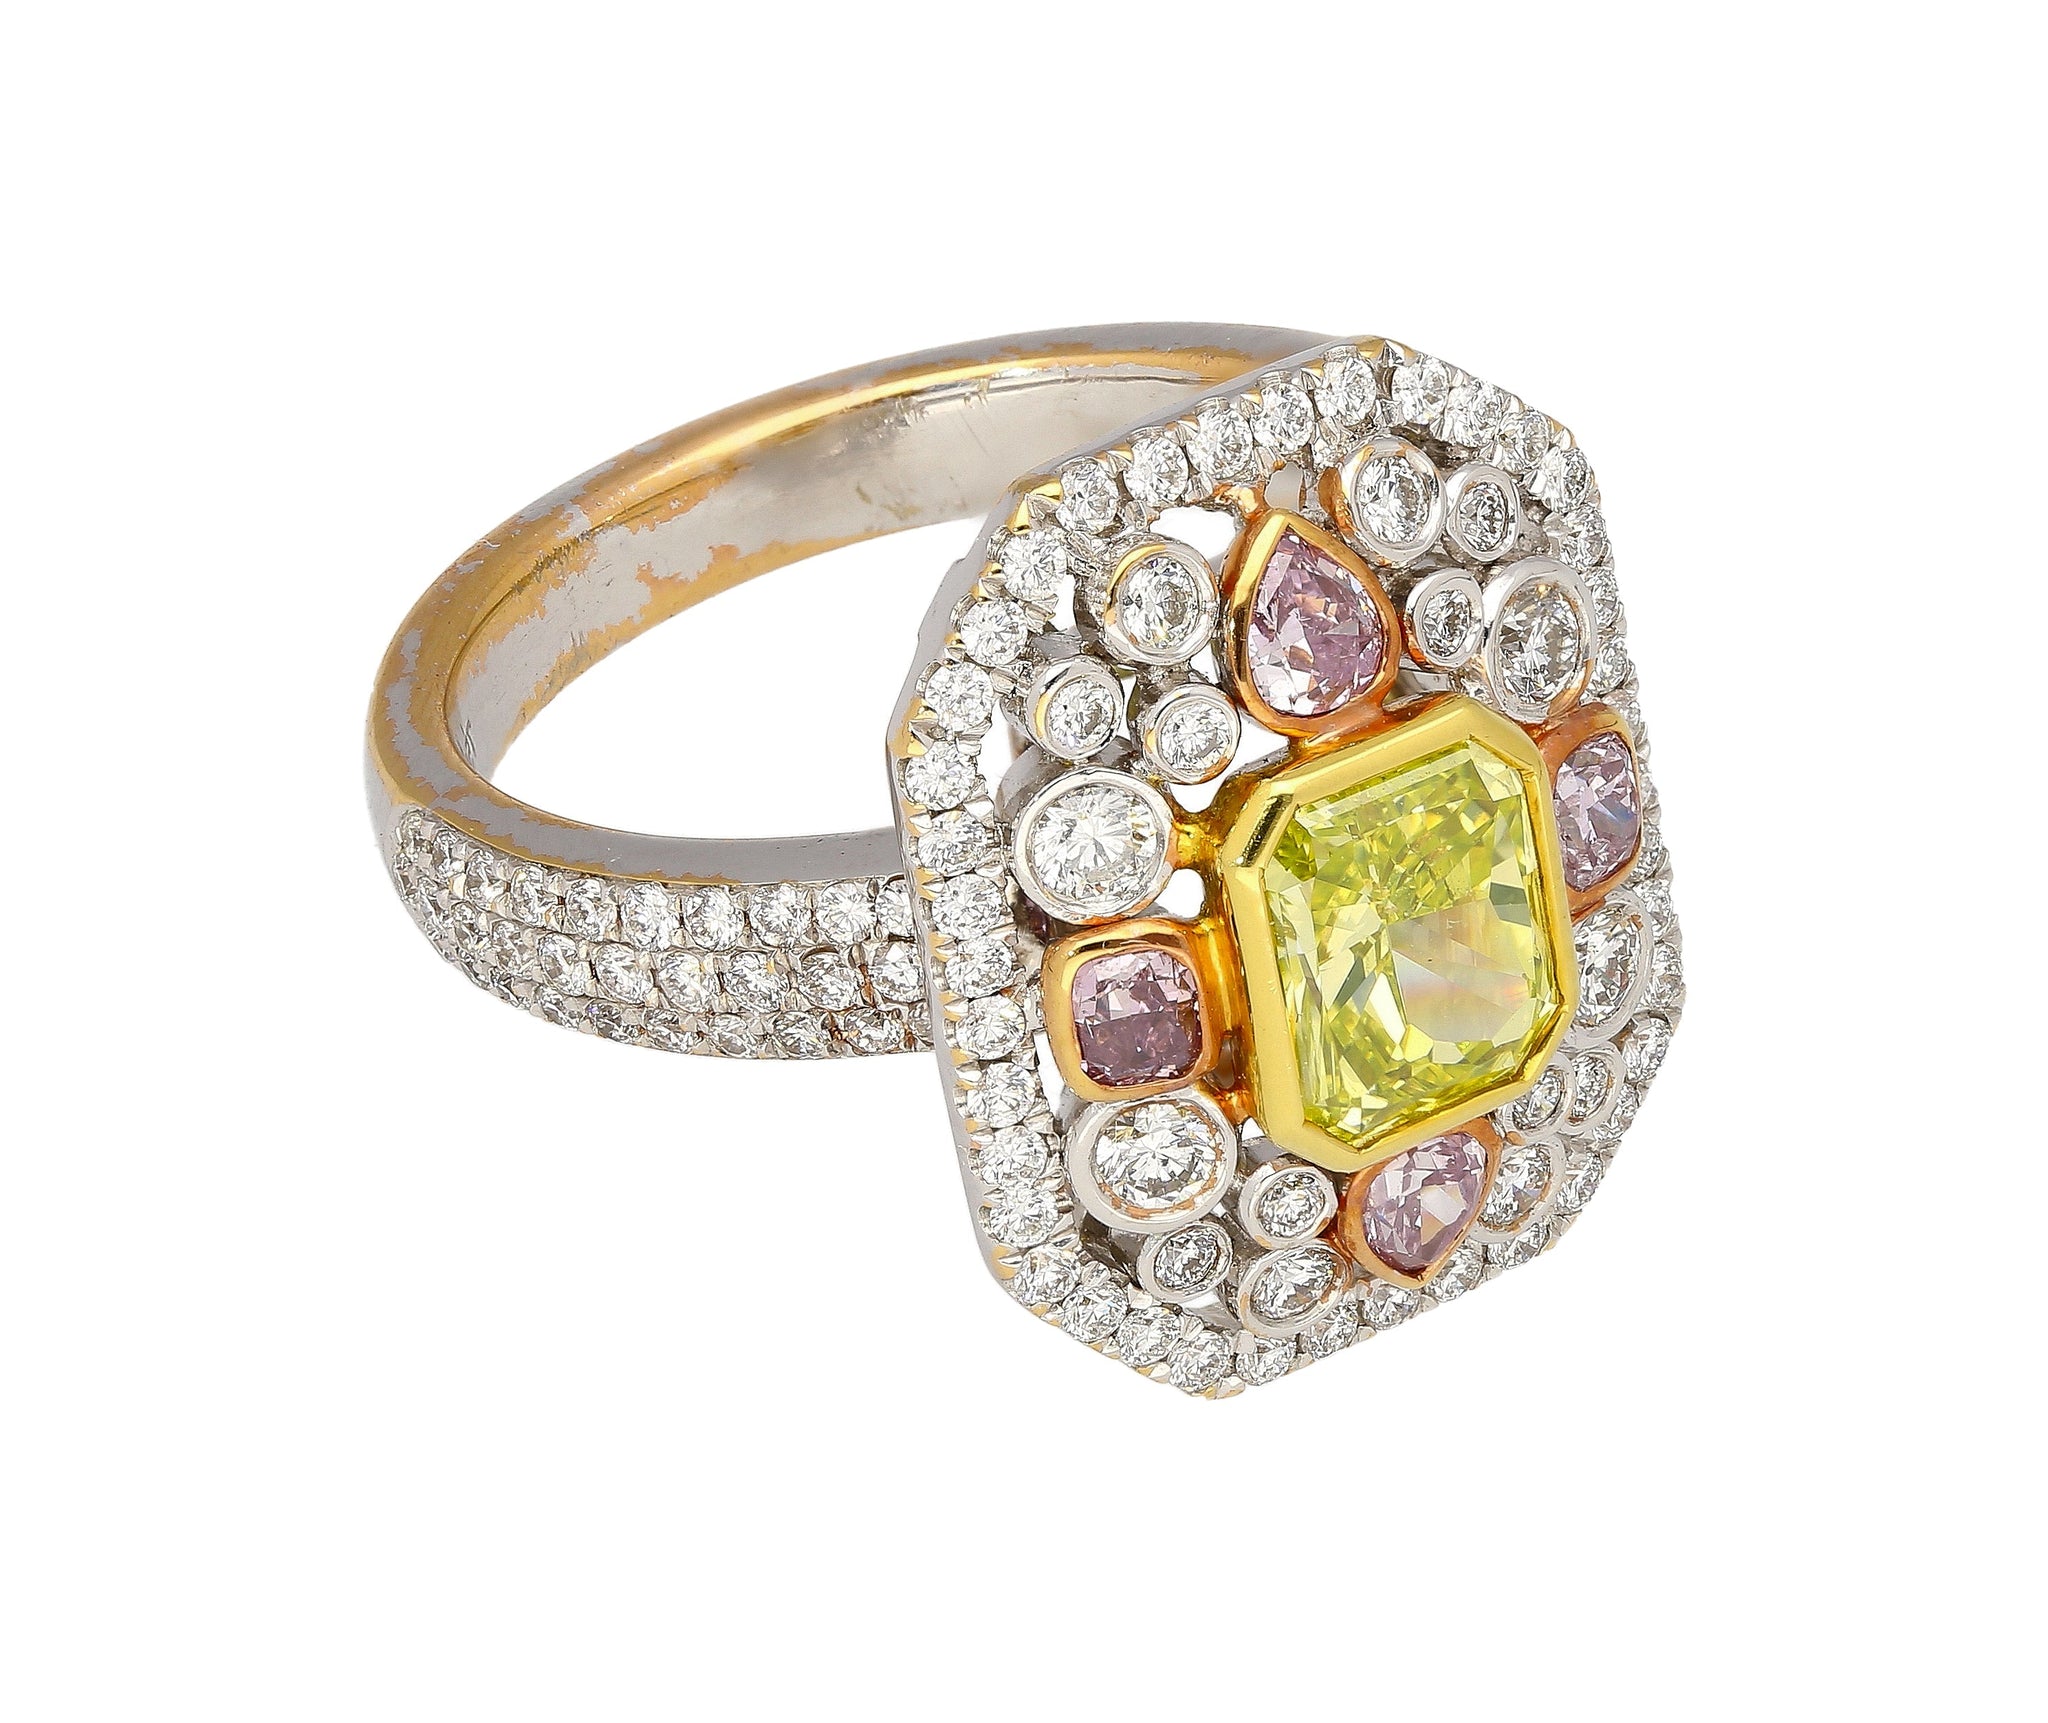 GIA Certified 1.15 Carat Radiant Cut Fancy Intense Yellowish Green Diamond Ring With Pink/White Side Stones